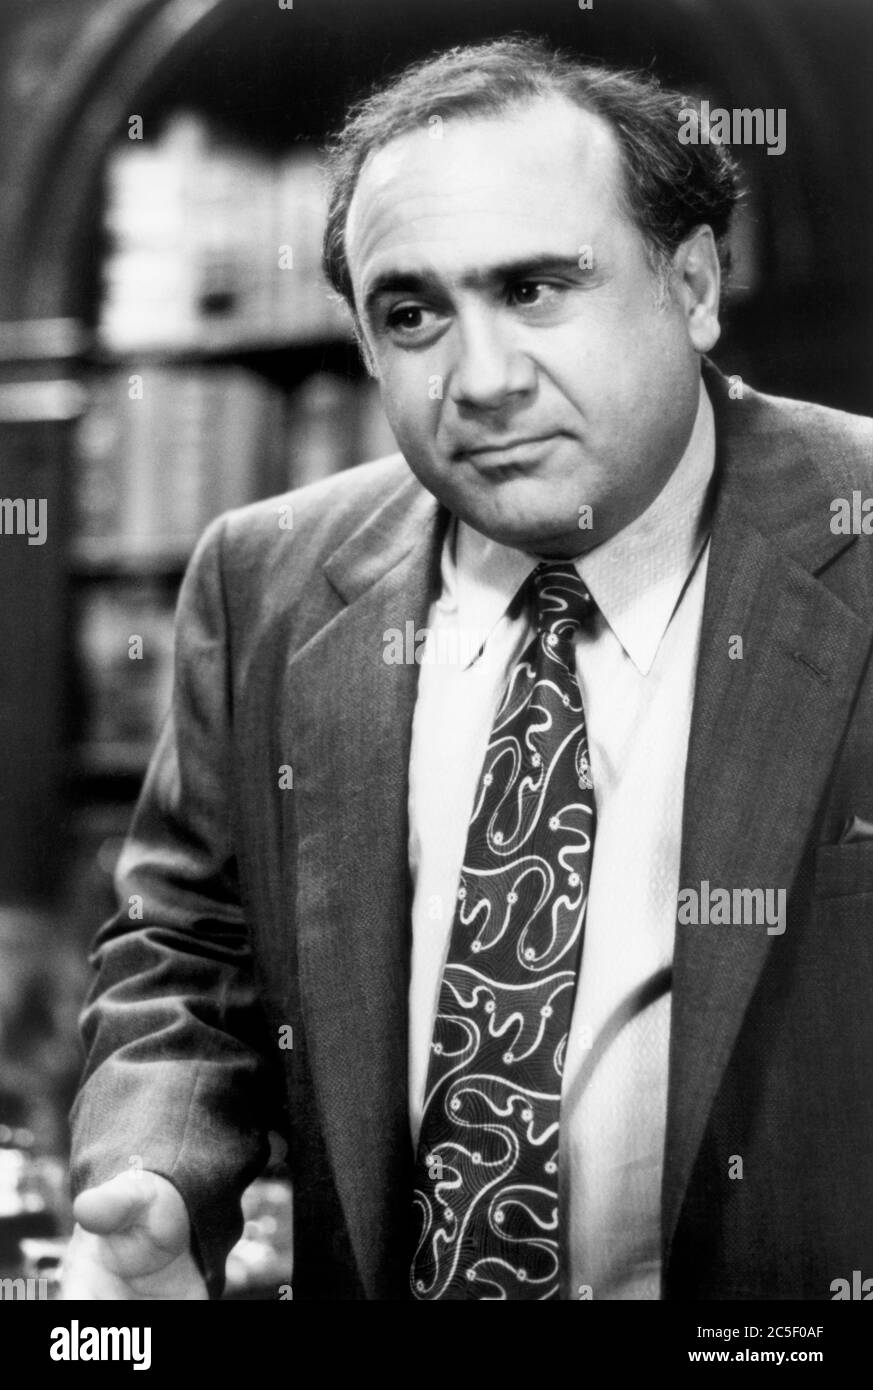 Danny DeVito, Half-Length Portrait for the Film, 'The War of the Roses', 20th Century-Fox, 1989 Stock Photo